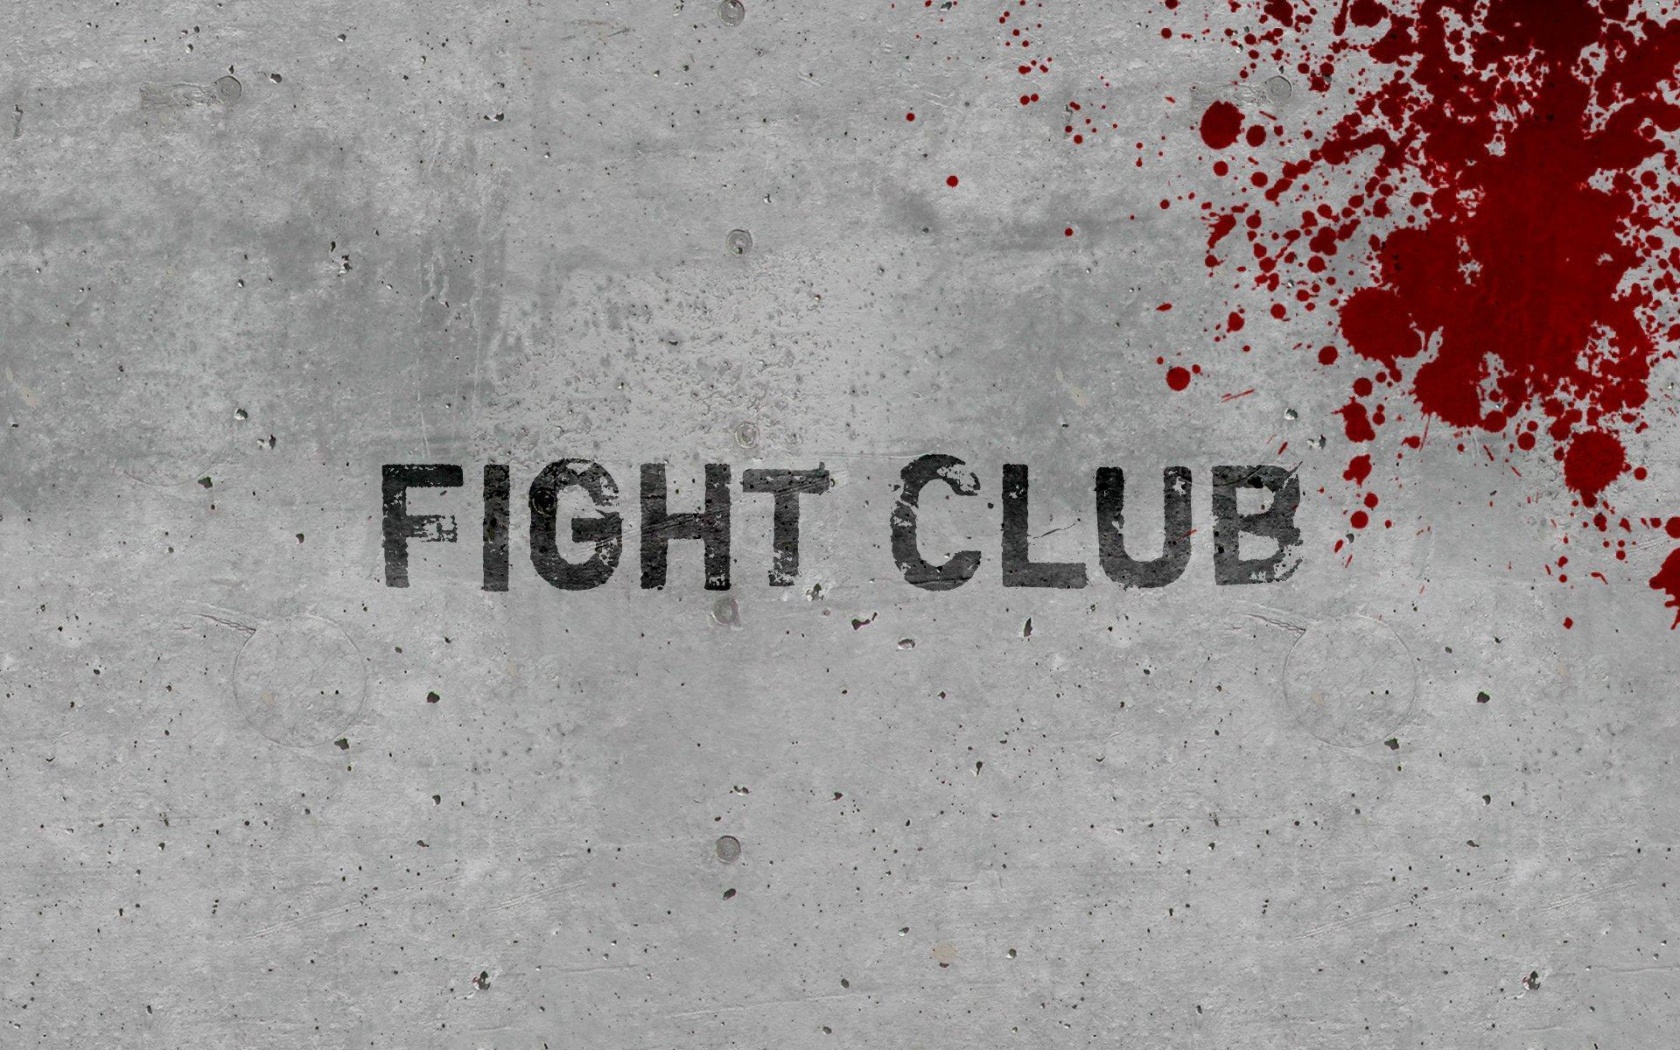 fight club wallpaper iphone,text,font,red,wall,cement